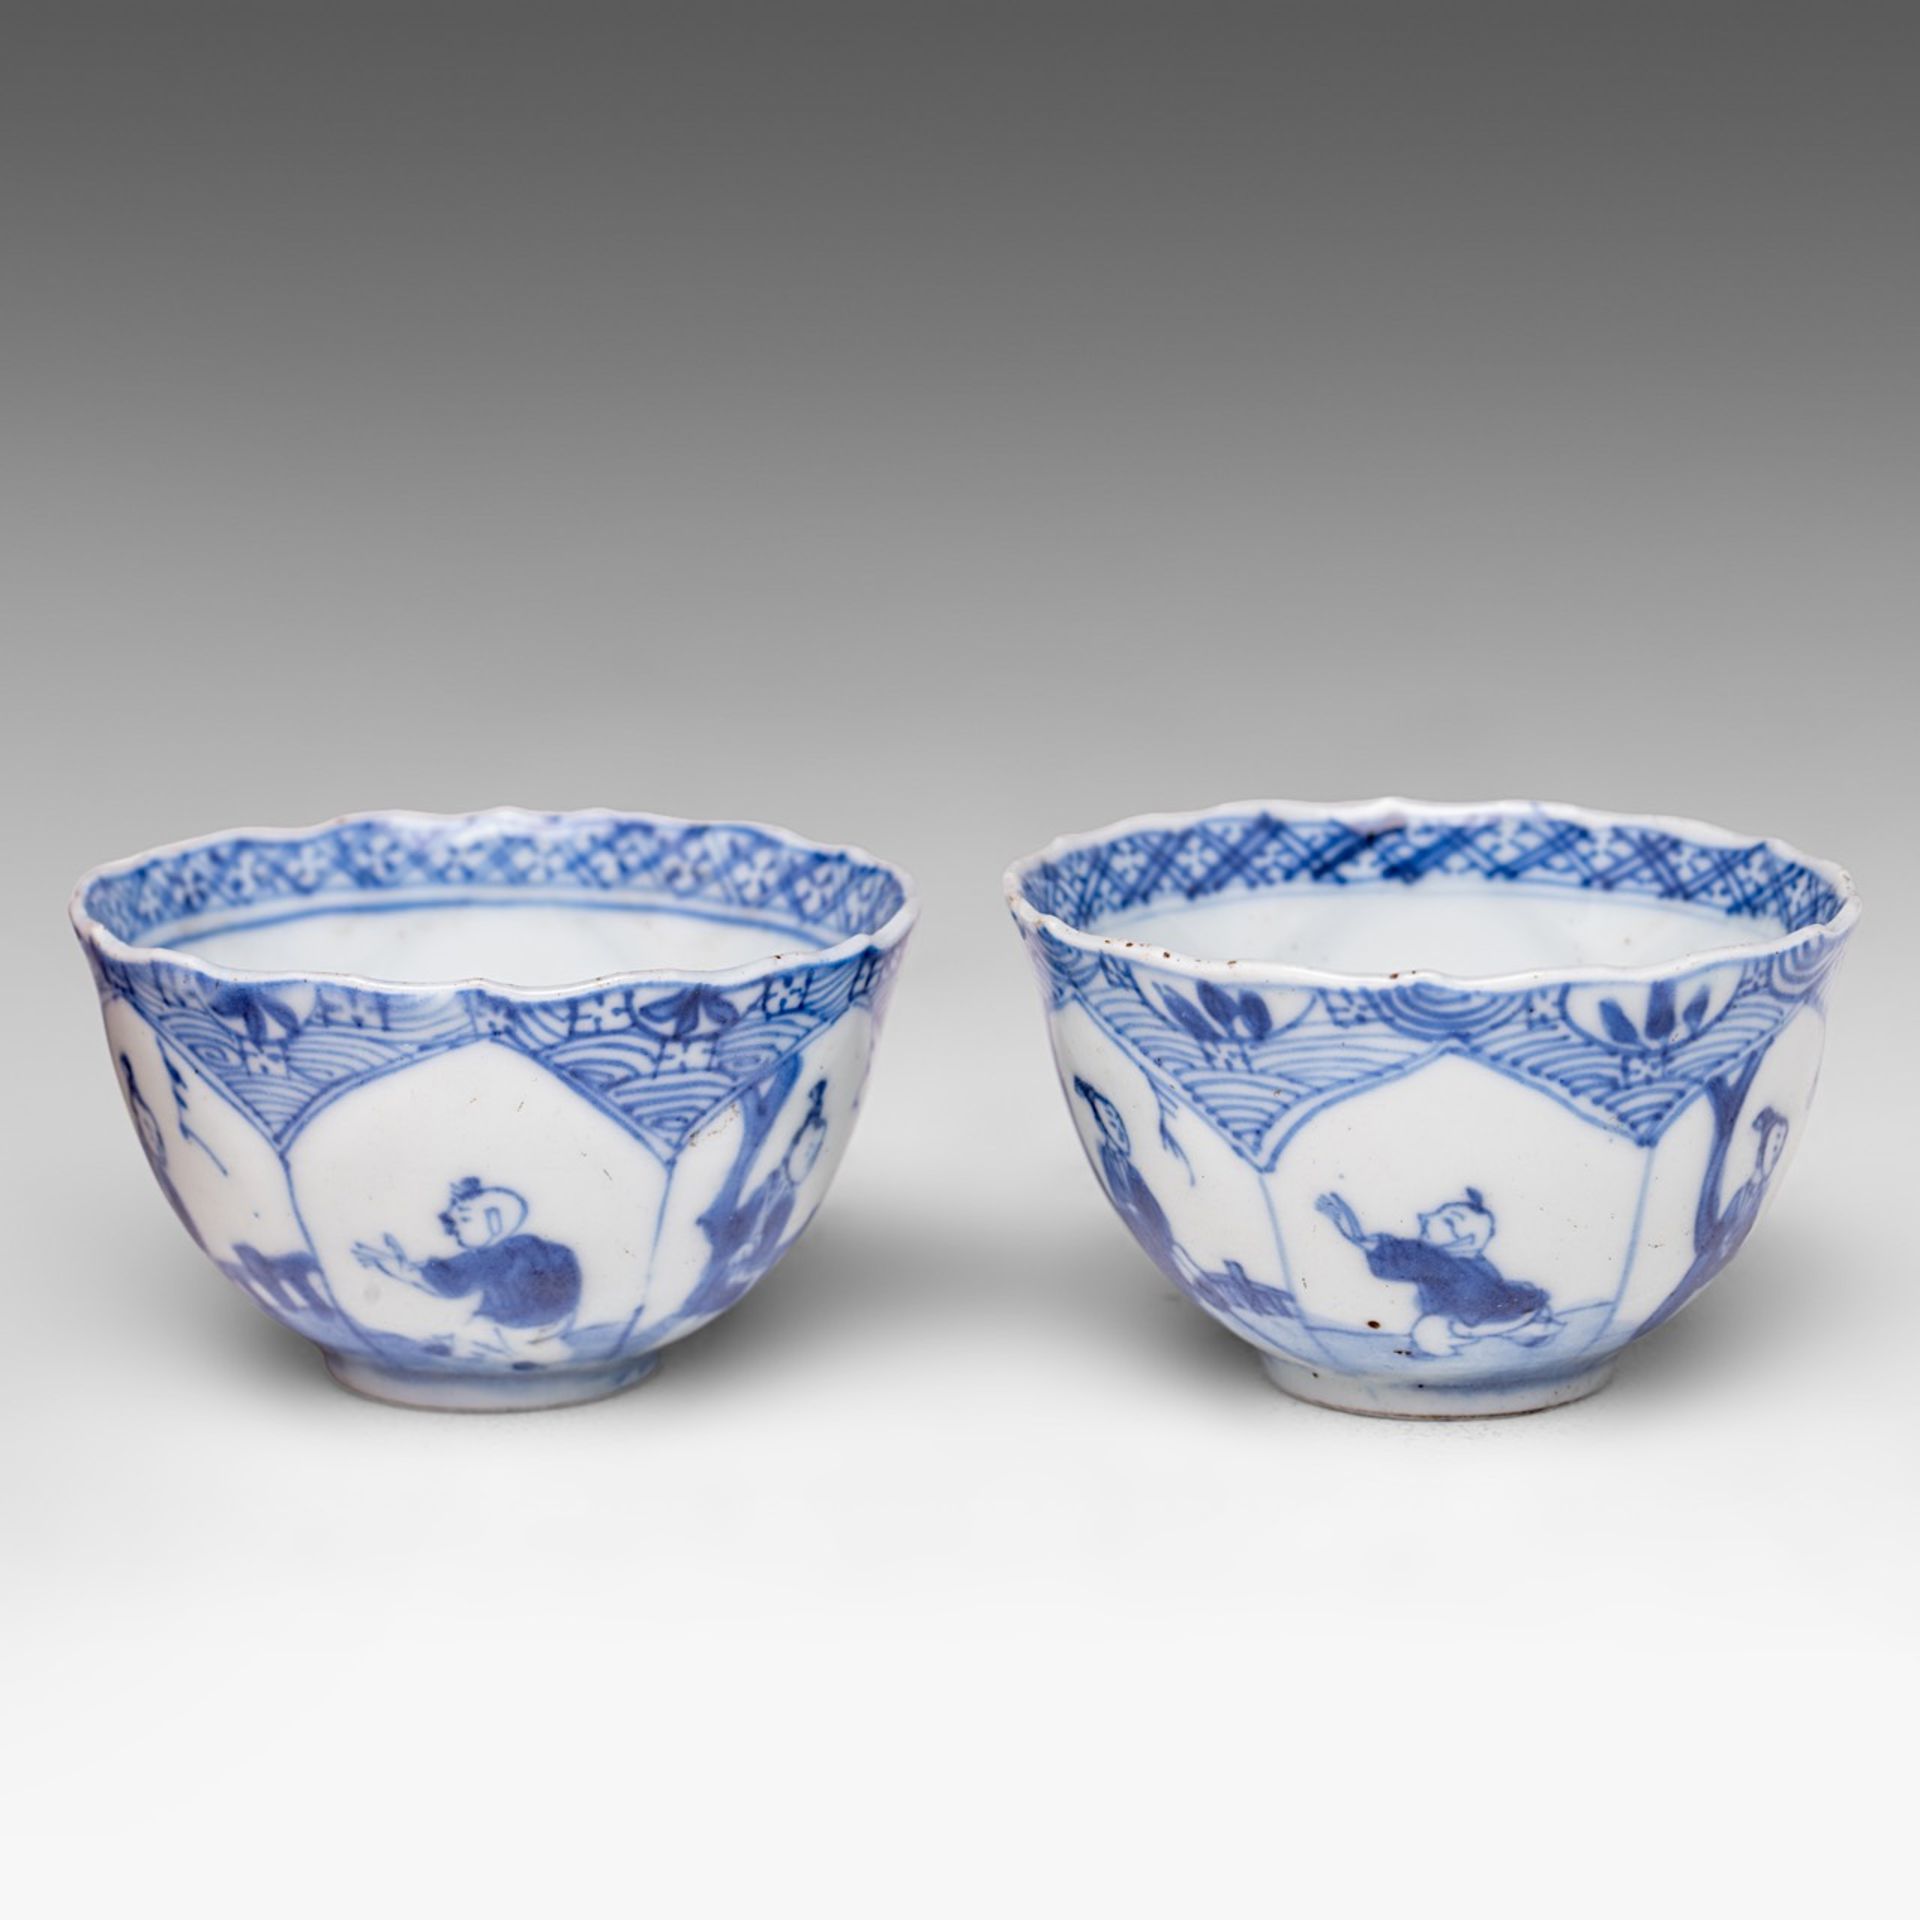 Two Chinese blue and white 'Long Elisa' tea cups, Kangxi period, H - dia cm - Image 3 of 6